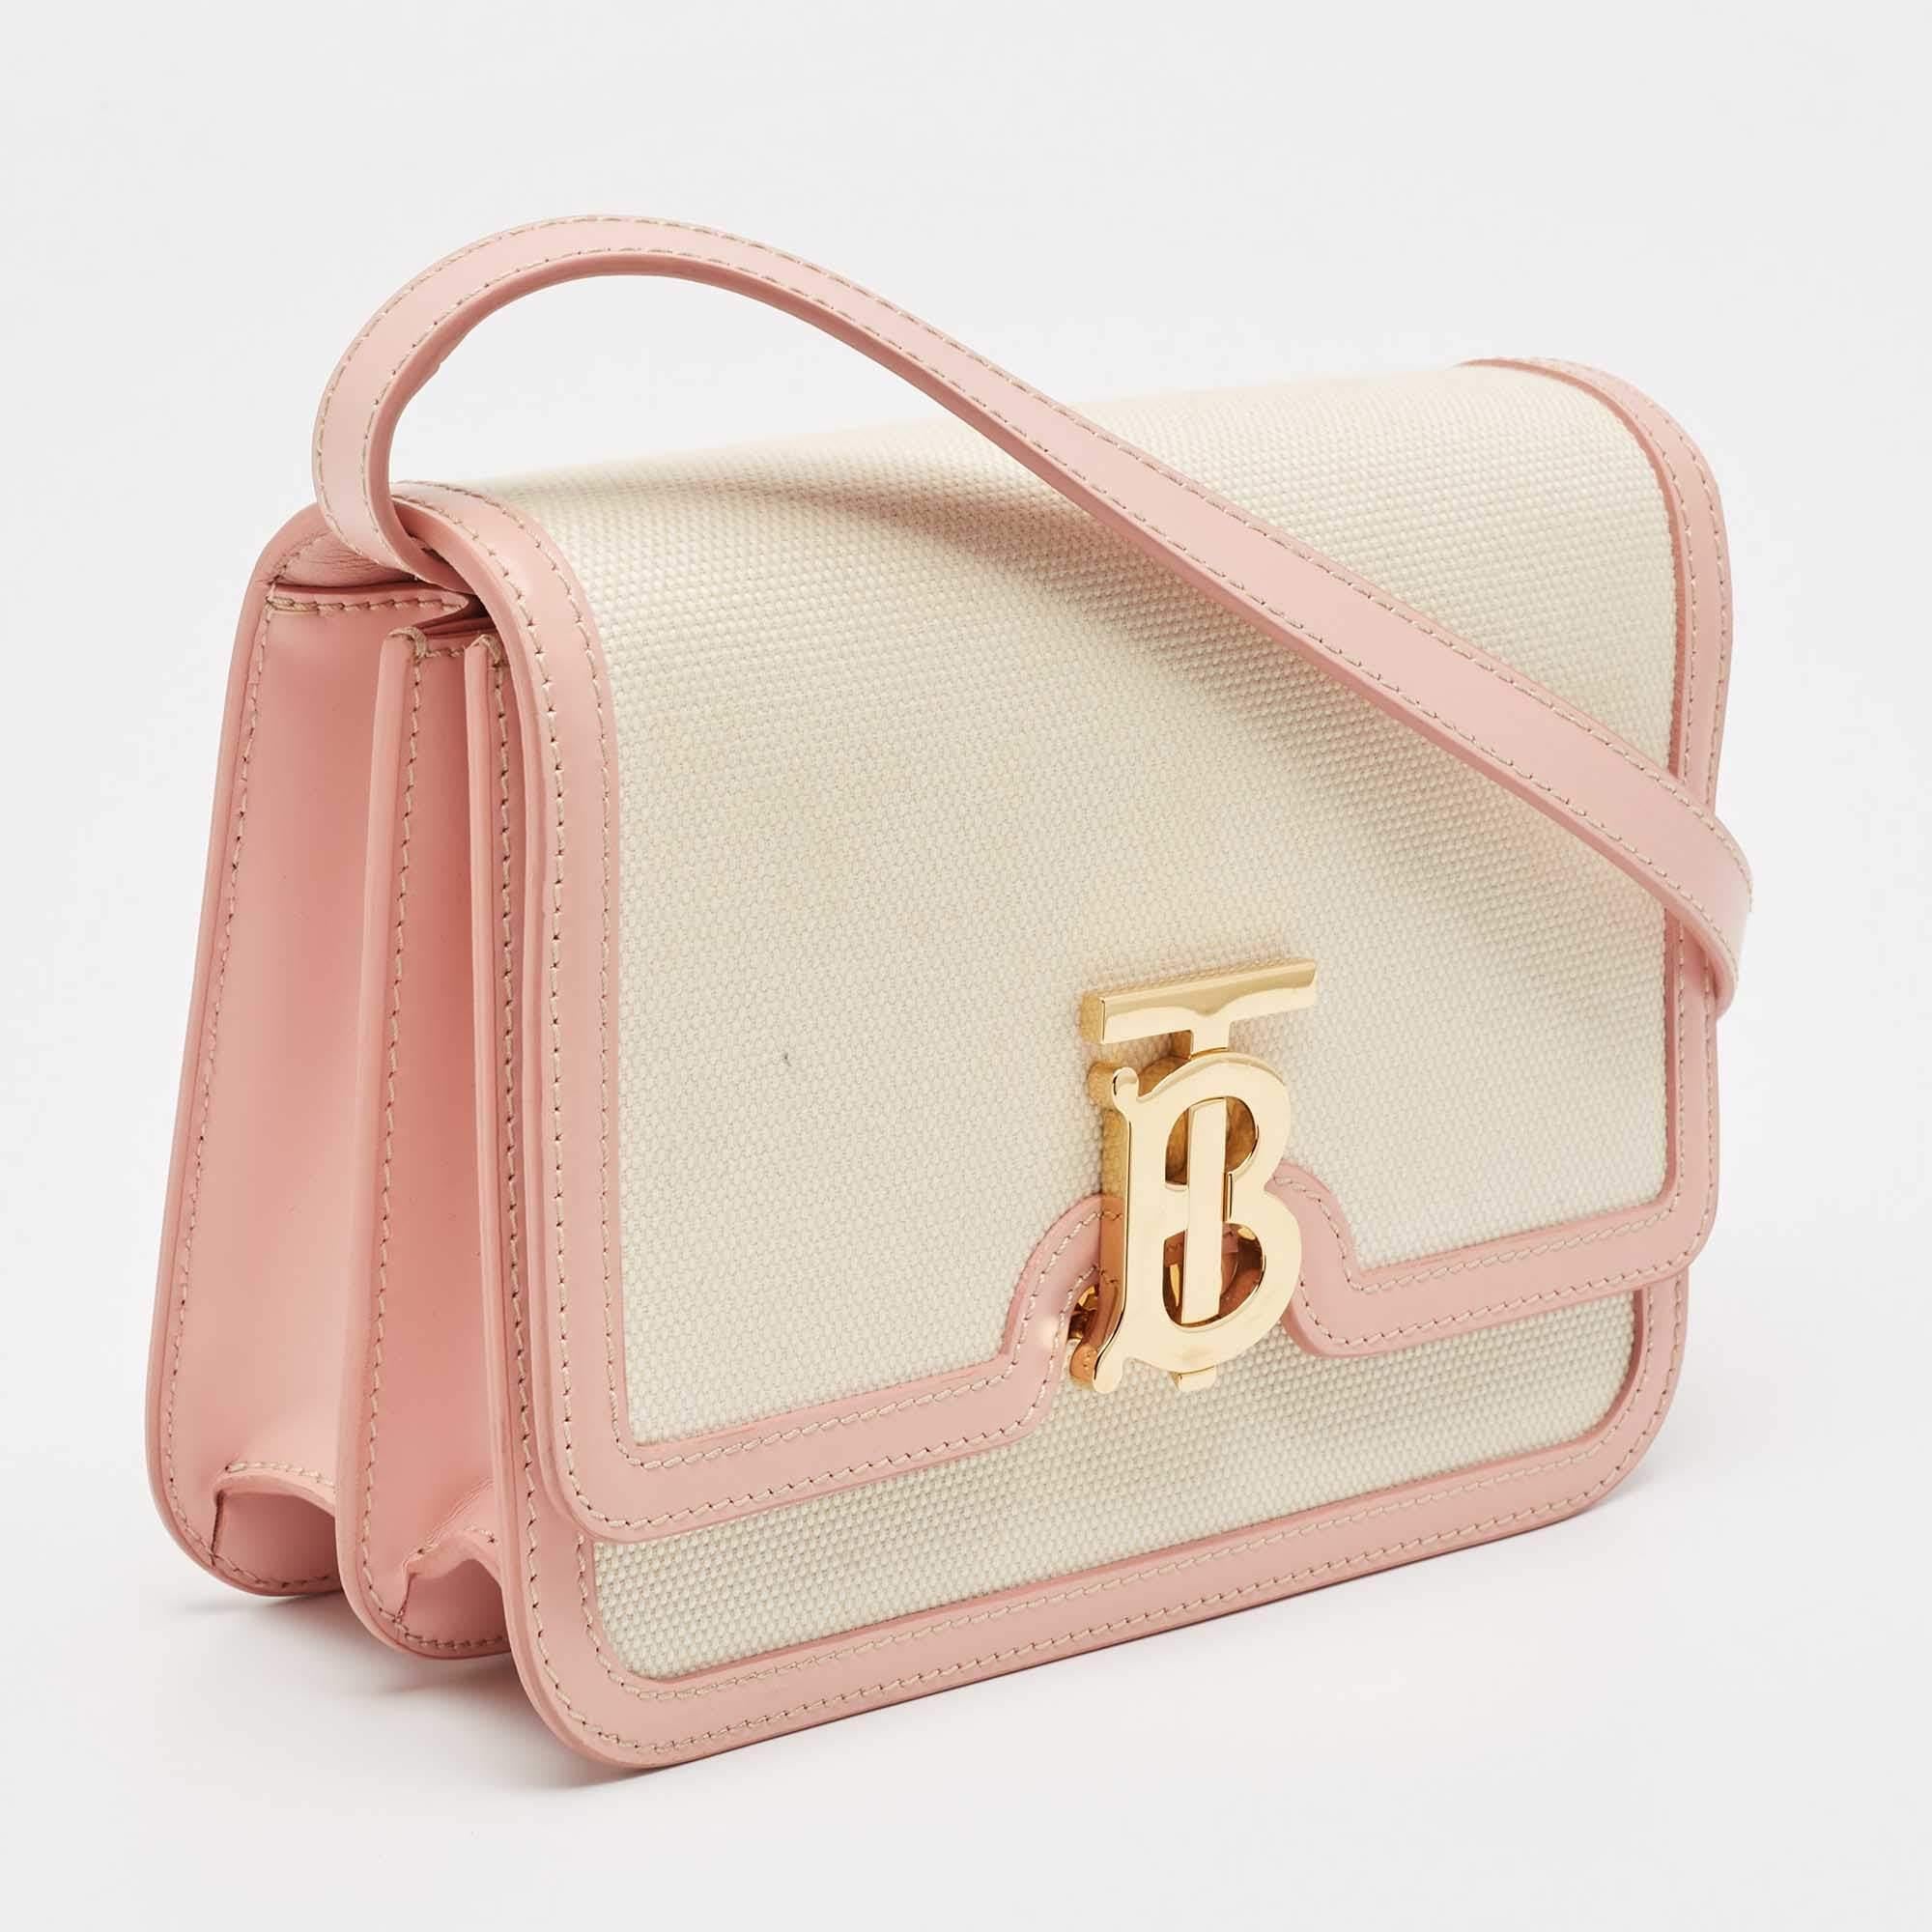 Burberry Cream/Pink Canvas and Leather Small TB Shoulder Bag For Sale 7